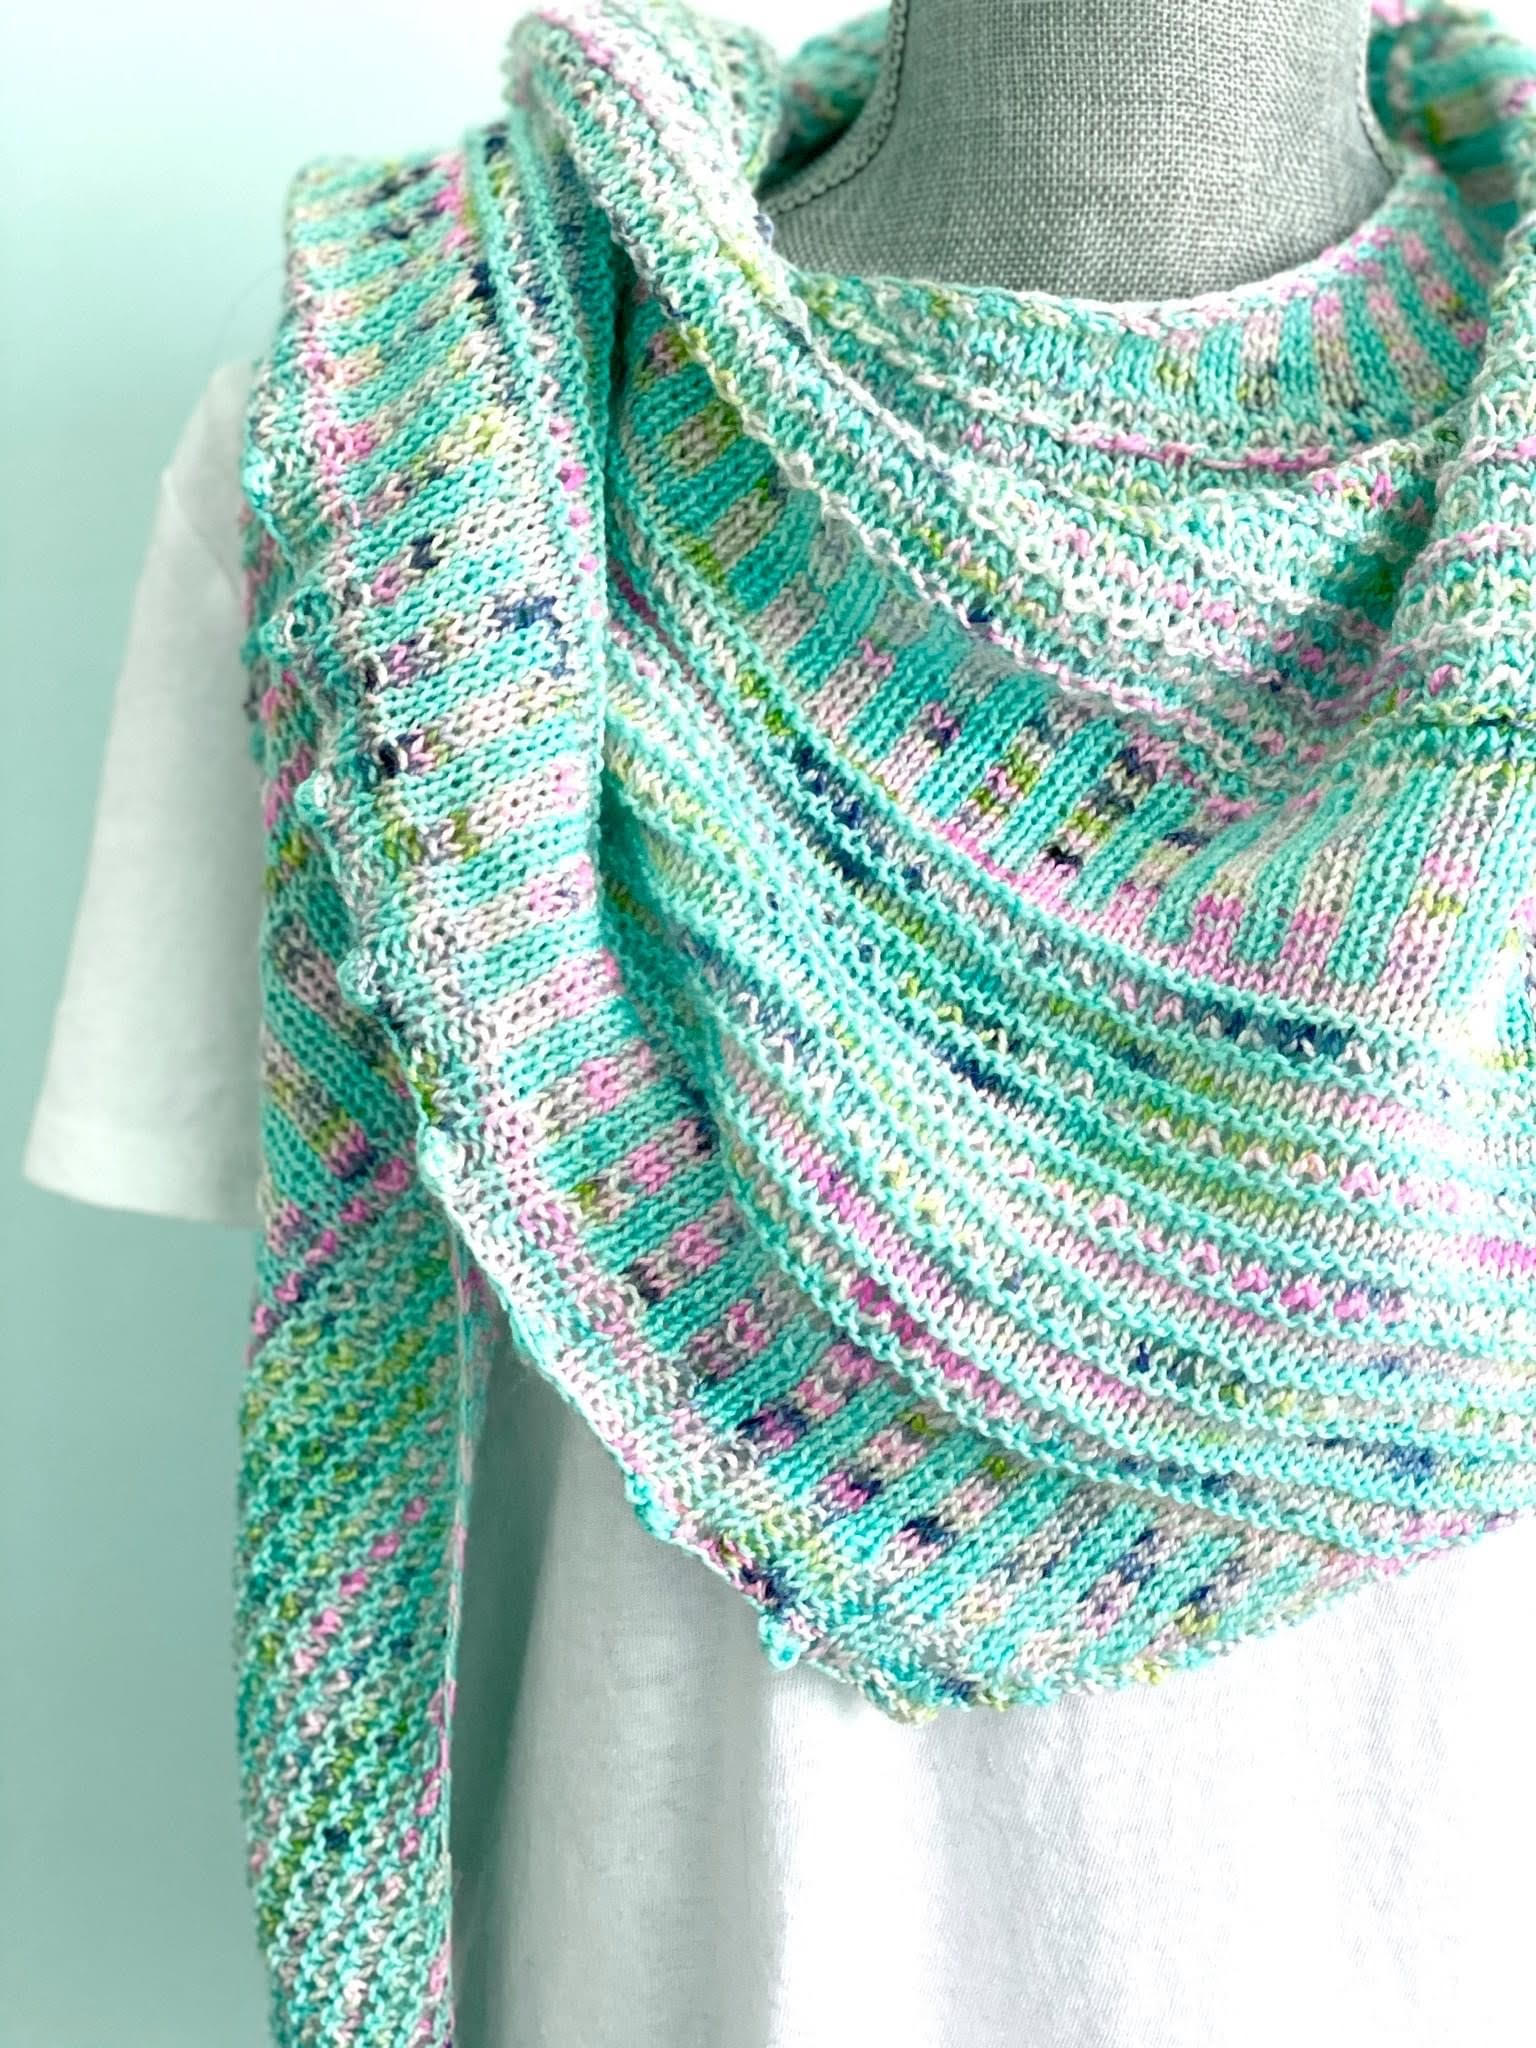 breathe and hope shawl by casapinka